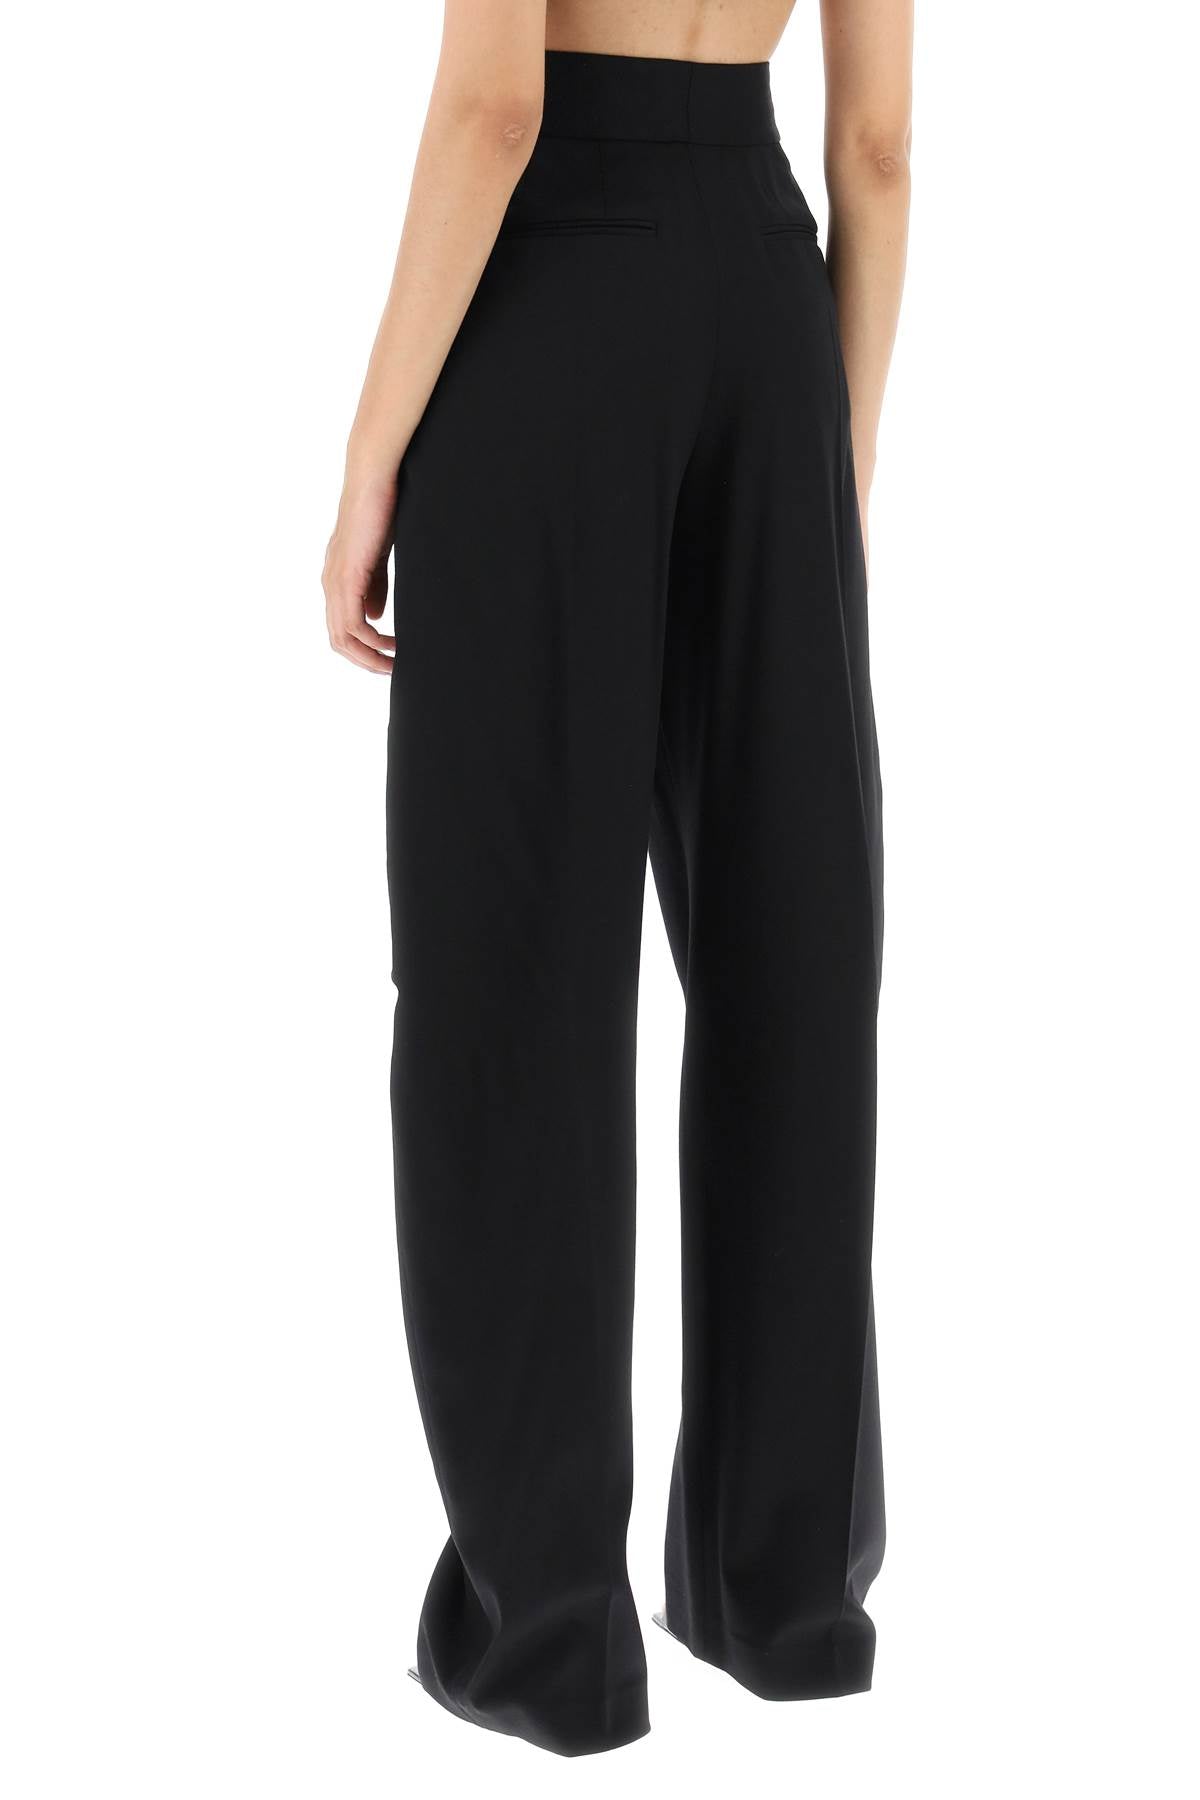 THE ATTICO High-Waisted Stretch Wool Trousers for Women in Black - FW23 Collection